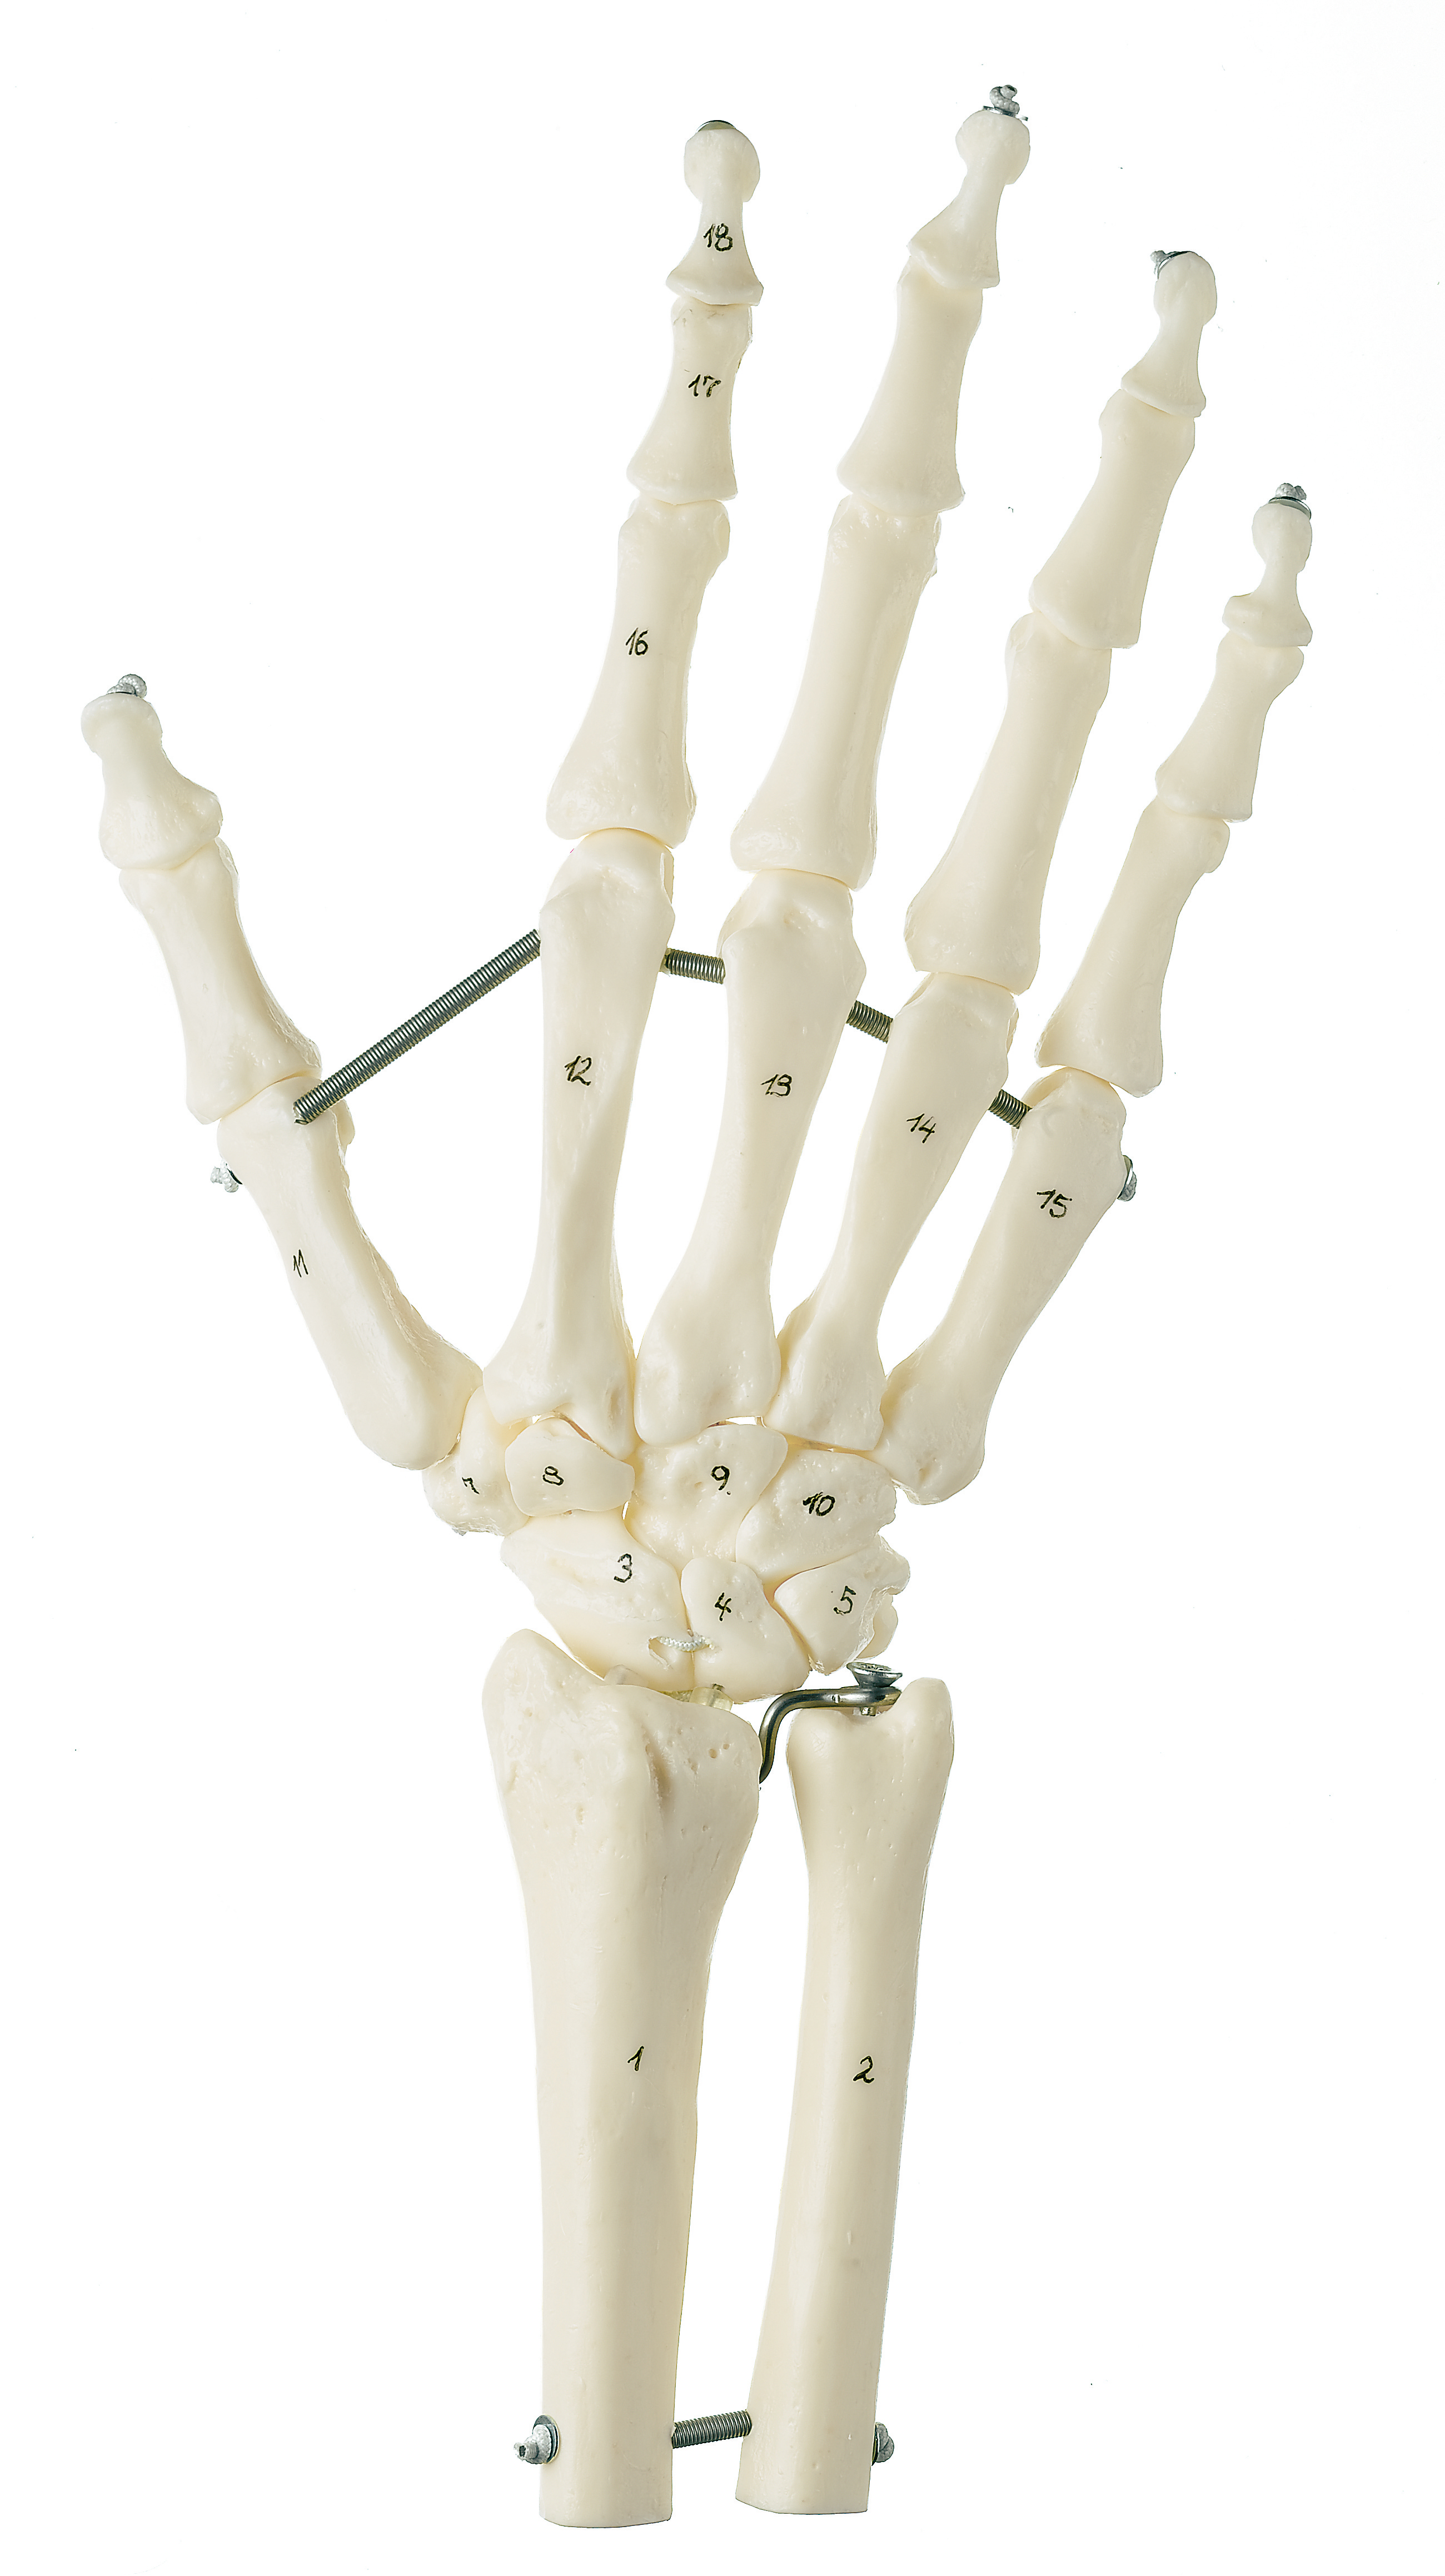 Skeleton of the Arm with Shoulder Girdle, Bone Models, Upper Extremities, Extremities, Anatomical SOMSO® models